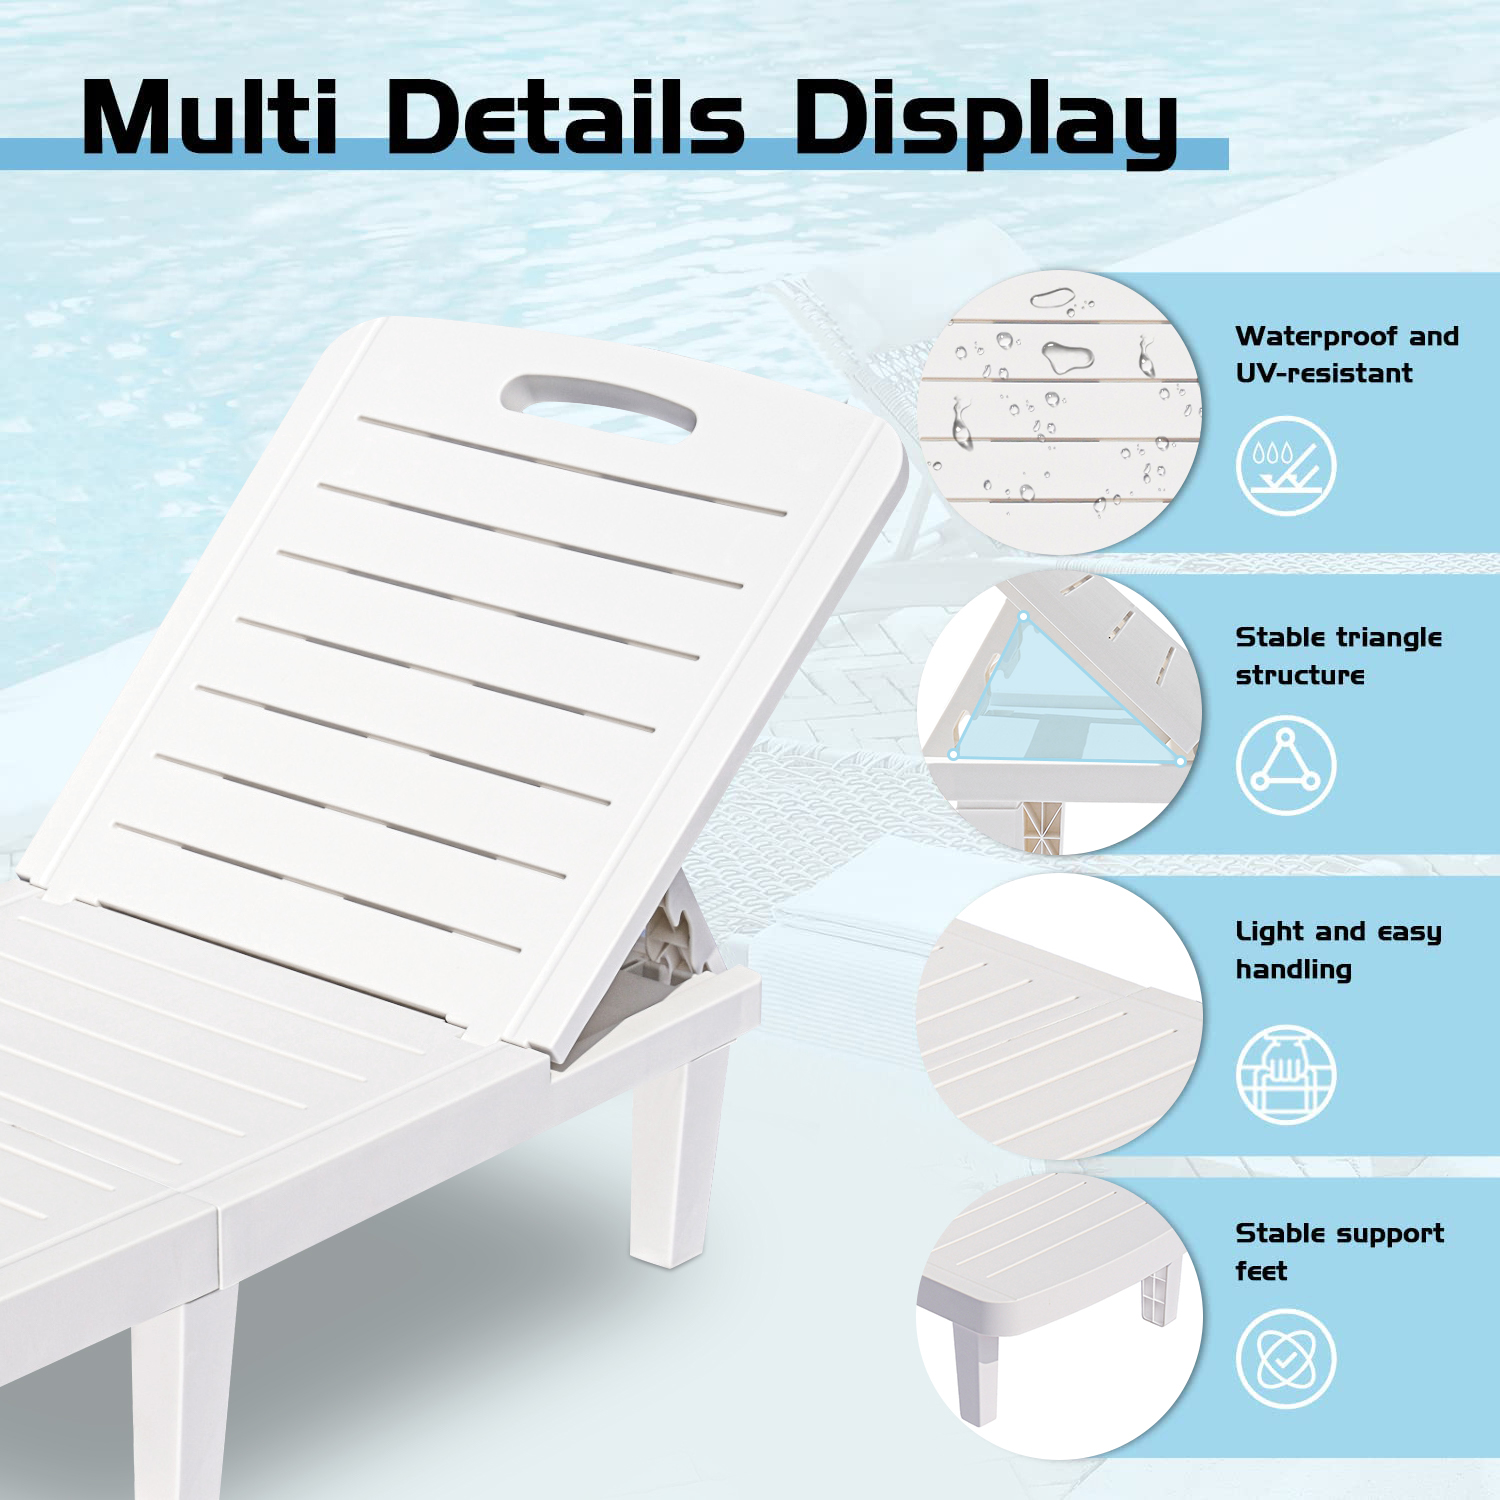 2 Piece Outdoor Lounge Chair, SHINPT Lounge Chair Outdoor with Adjustable 5 Position and Retractable Cup Holders, Chaise Lounge with Waterproof and UV Resistant, for Garden, Beach, Yard, White - image 5 of 9